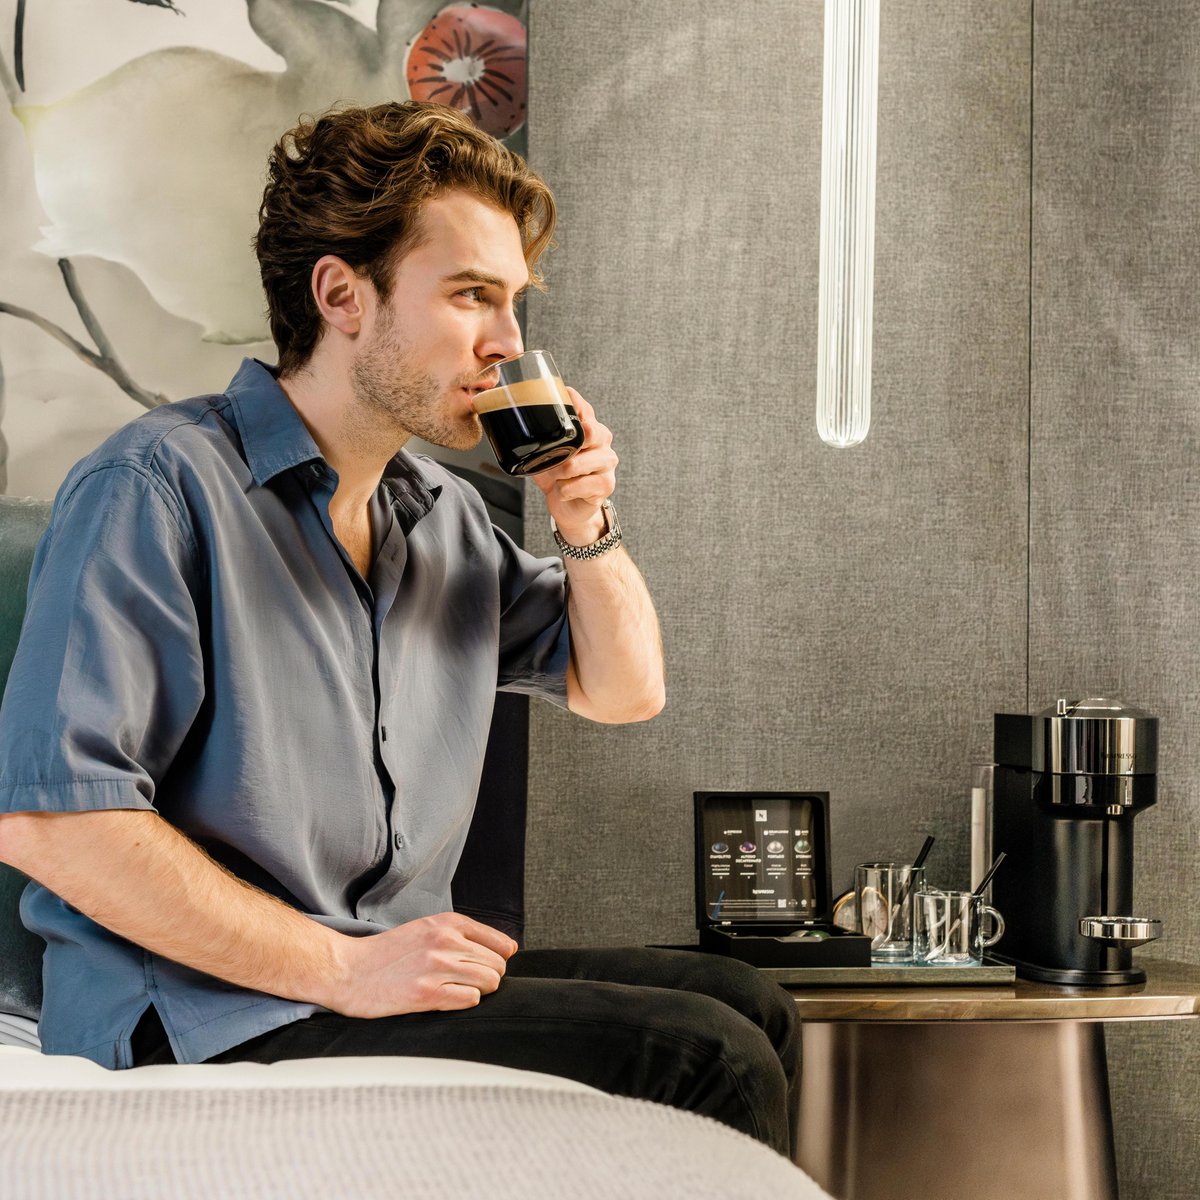 Step behind the scenes at Pan Pacific London, with Jesse from TopJaw. Redefine the luxury hotel experience with Nespresso Professional, from bedroom, restaurant, meeting rooms to spa. #LuxuryHotels #CoffeeExperience #NespressoProfessional